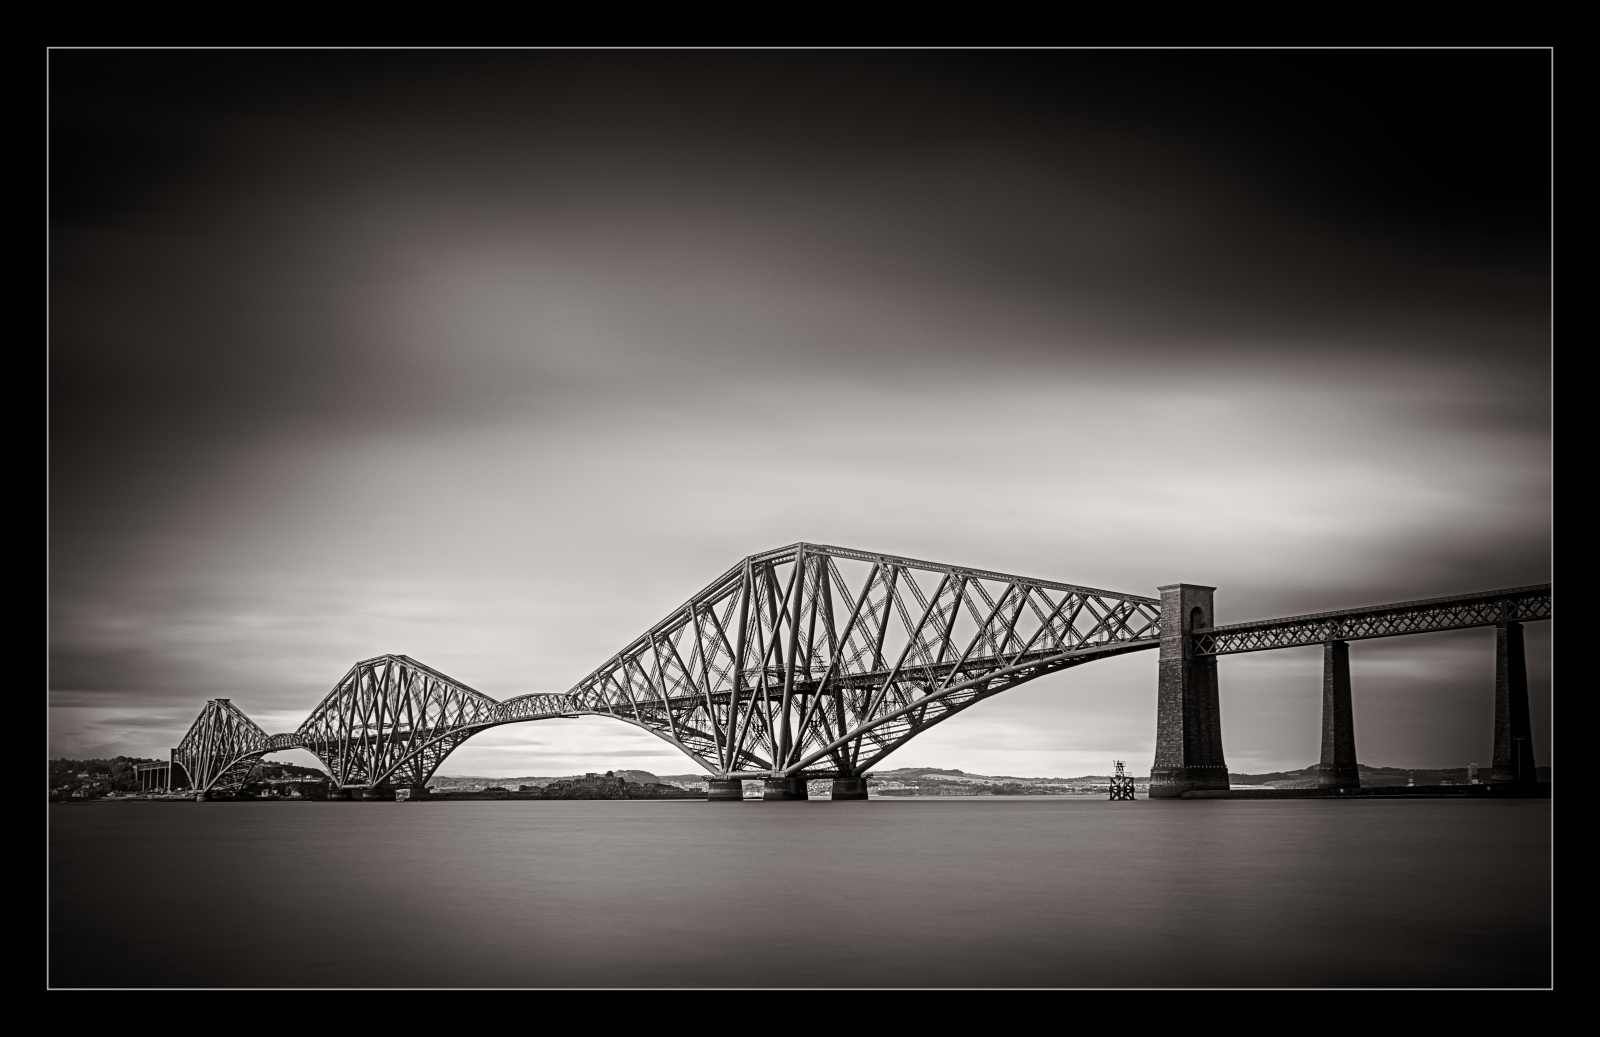 A classic shot - a long exposure black and white image of the Forth Railway Bridge from South Queensferry